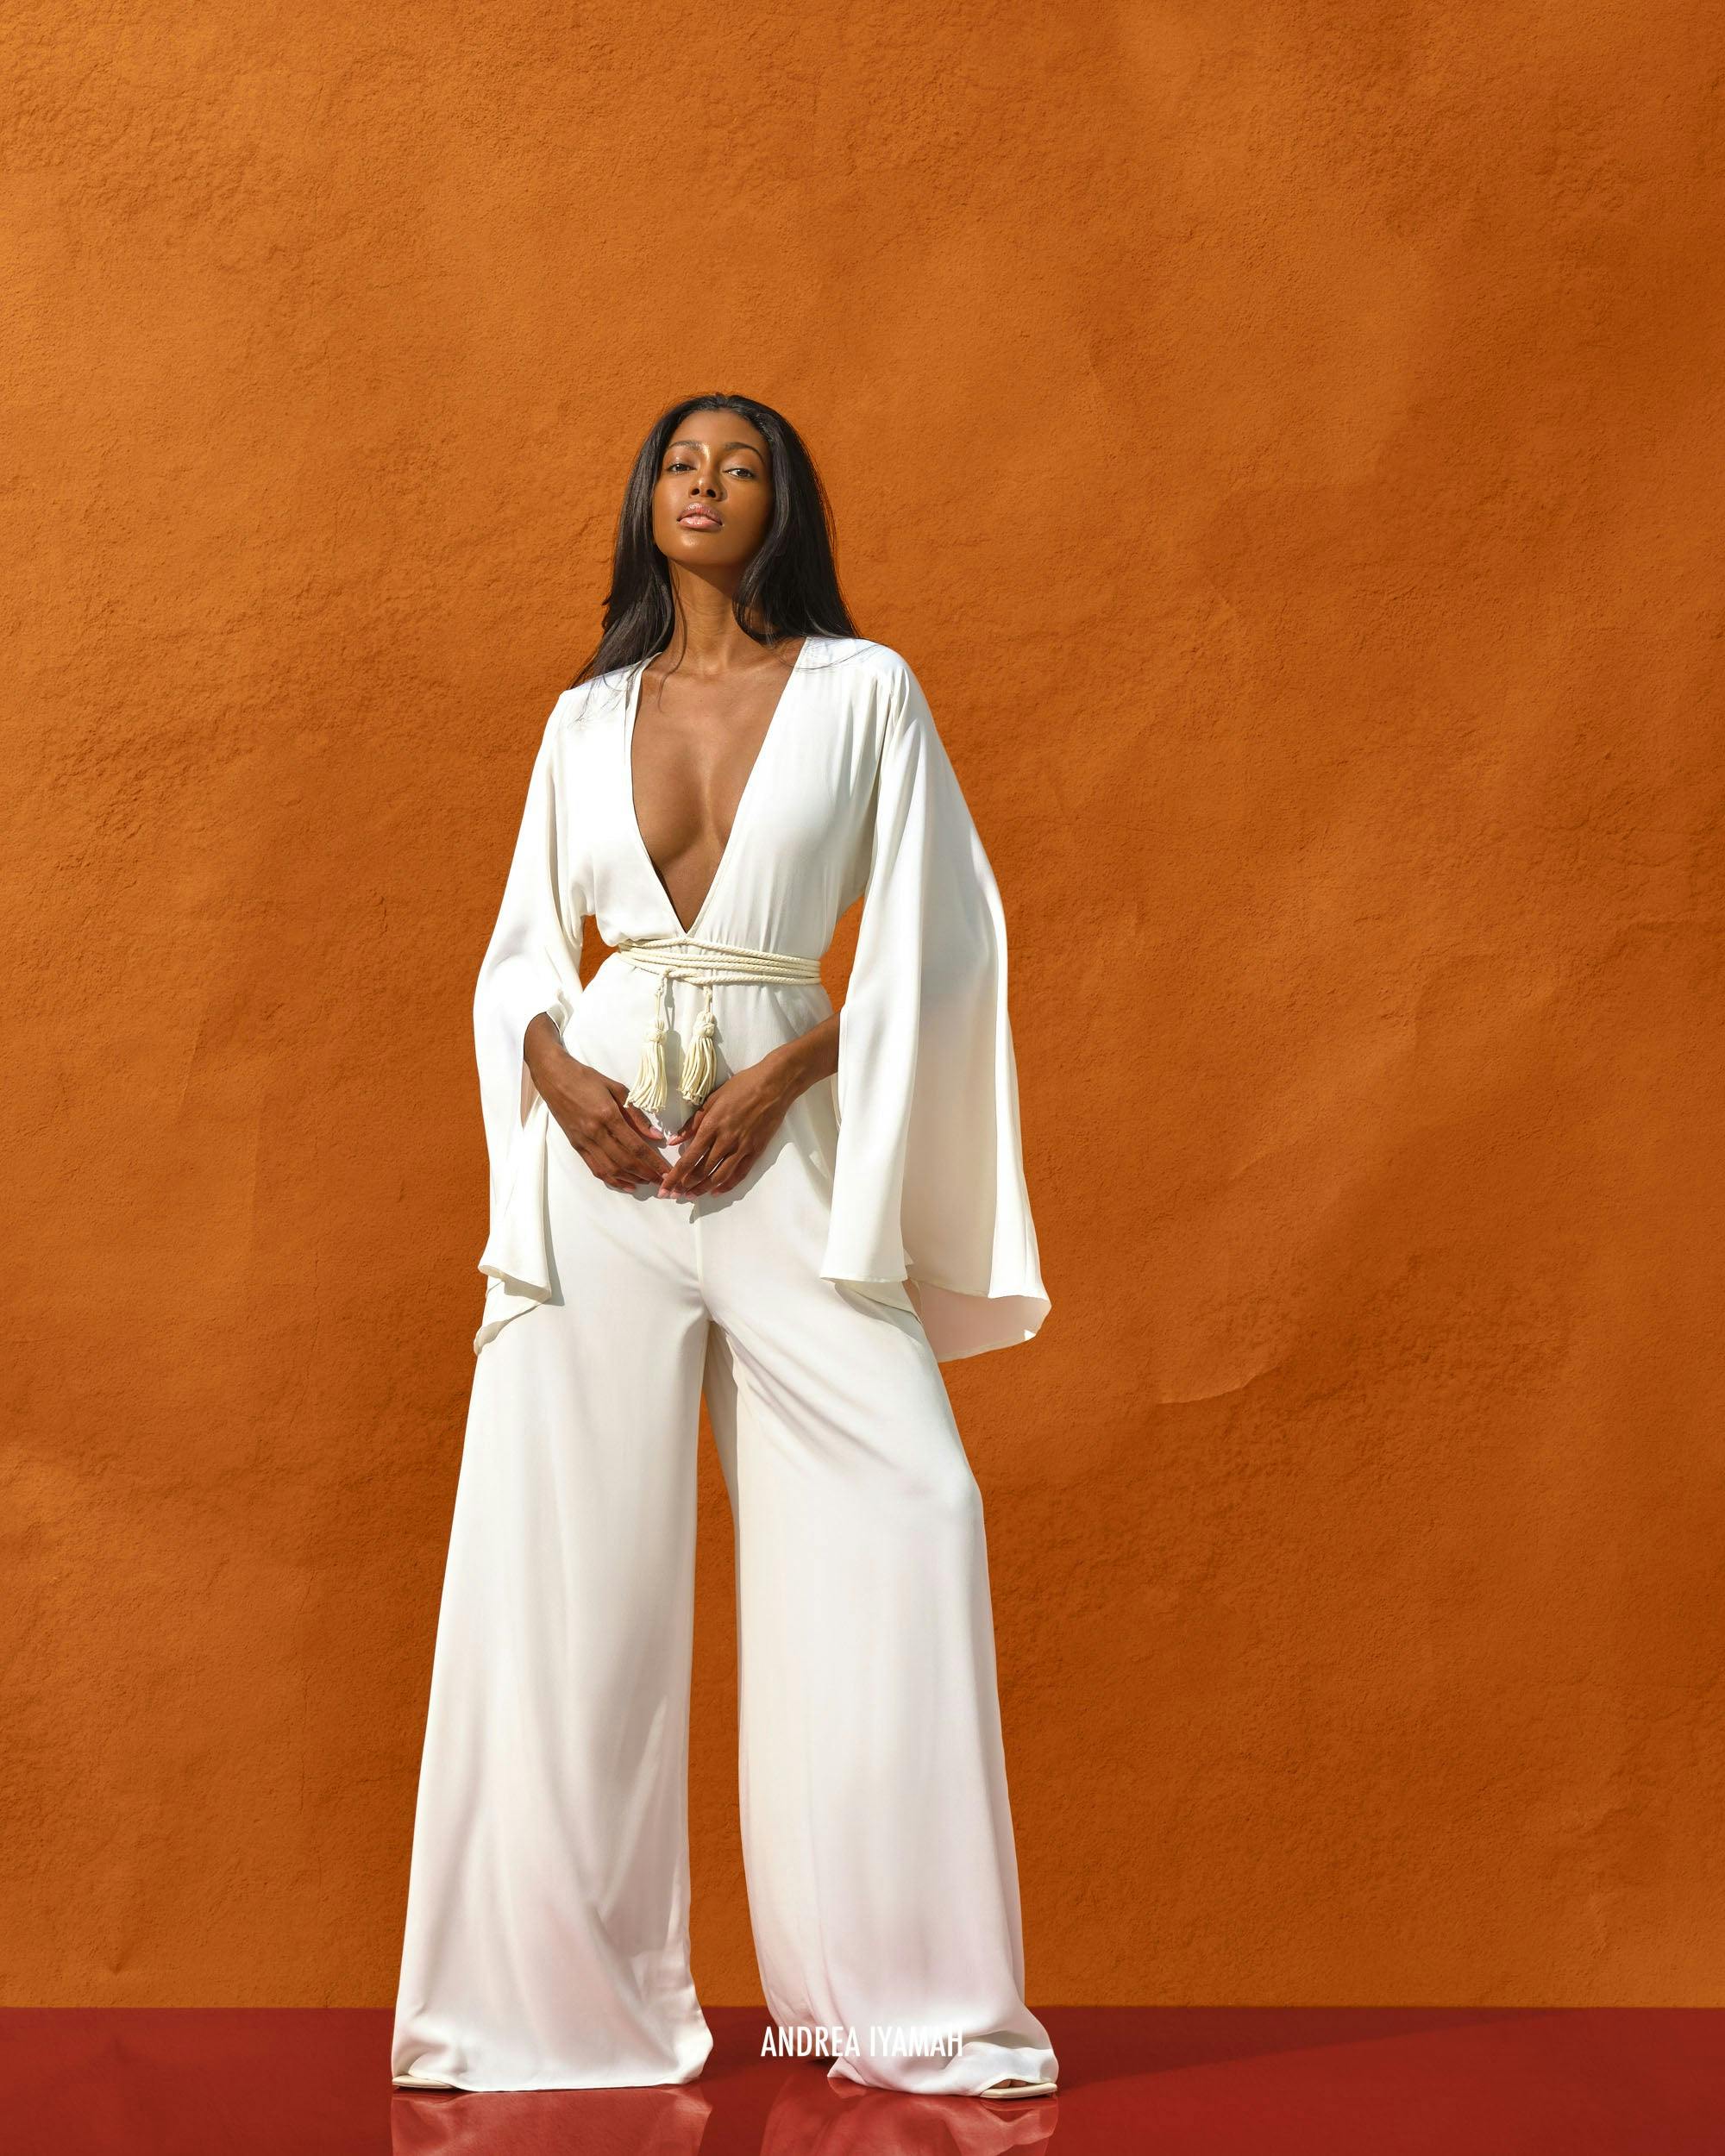 LILI JUMPSUIT - IVORY, a product by Andrea Iyamah